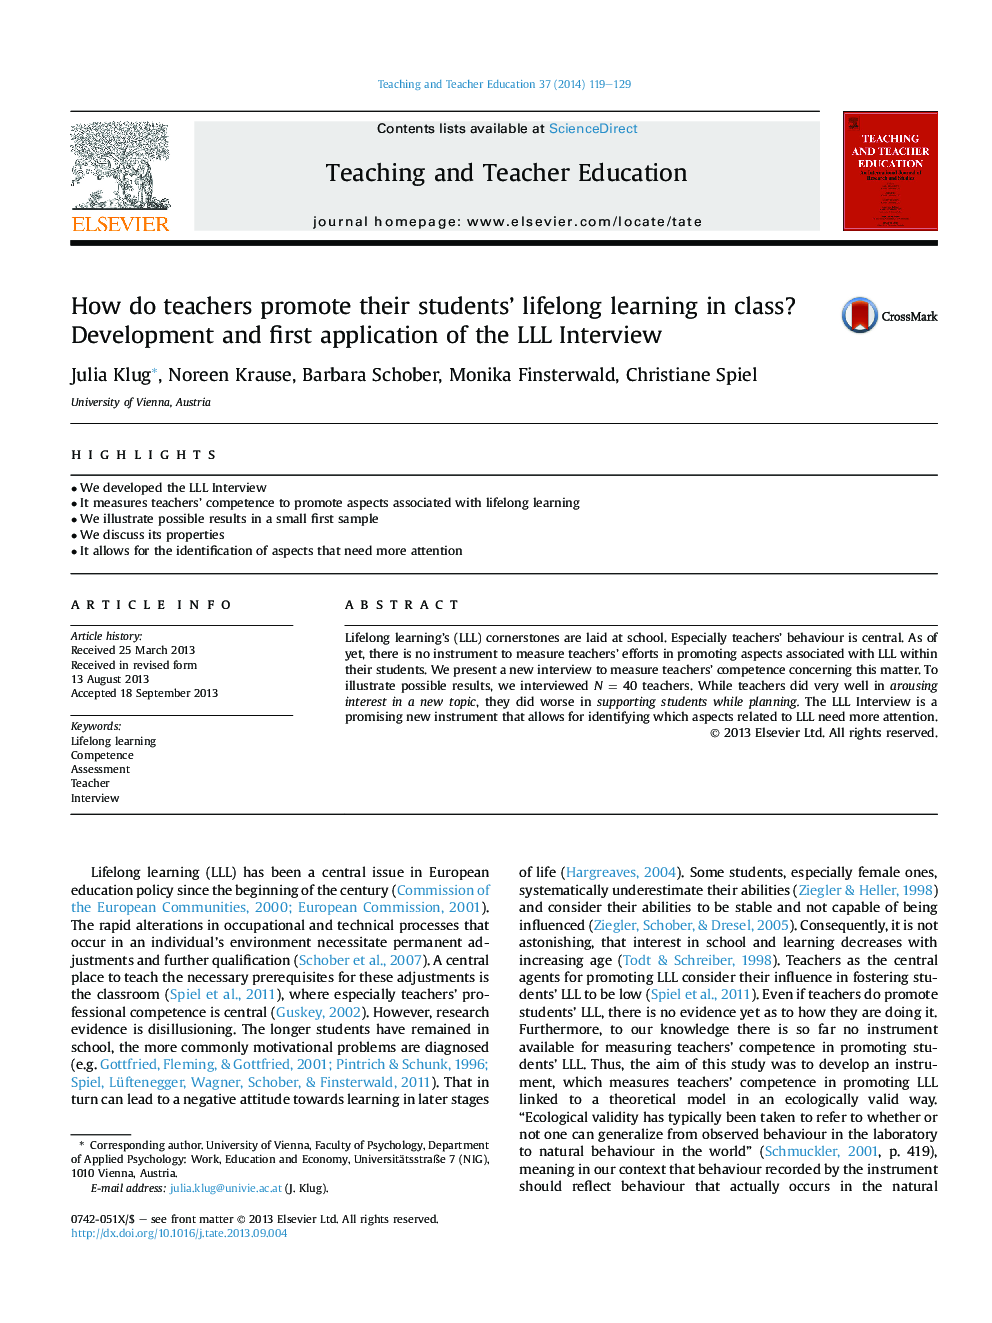 How do teachers promote their students' lifelong learning in class? Development and first application of the LLL Interview